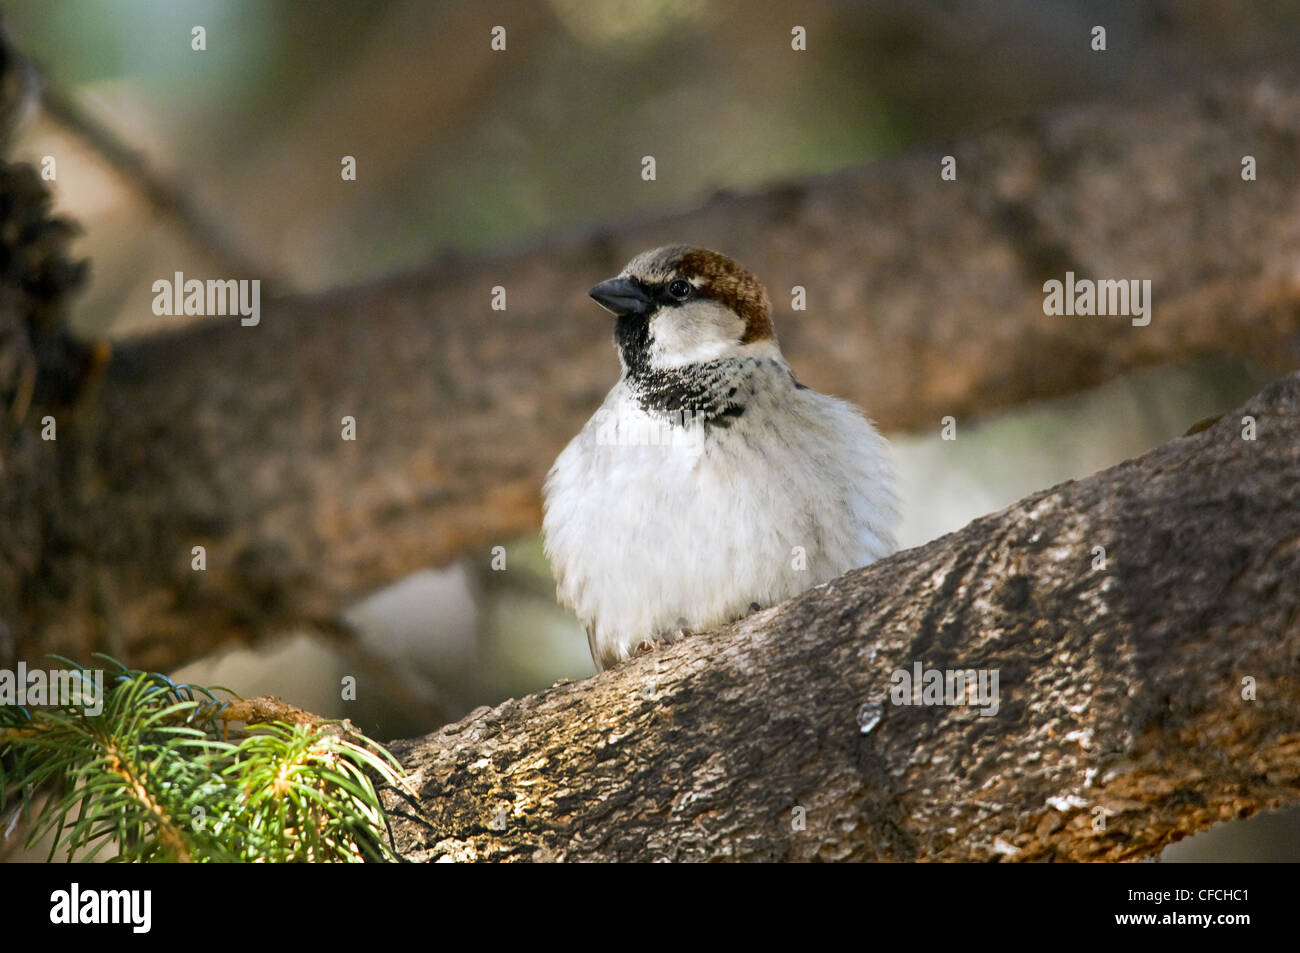 A House Sparrow (Passer domesticus) sitting on a tree branch. Stock Photo